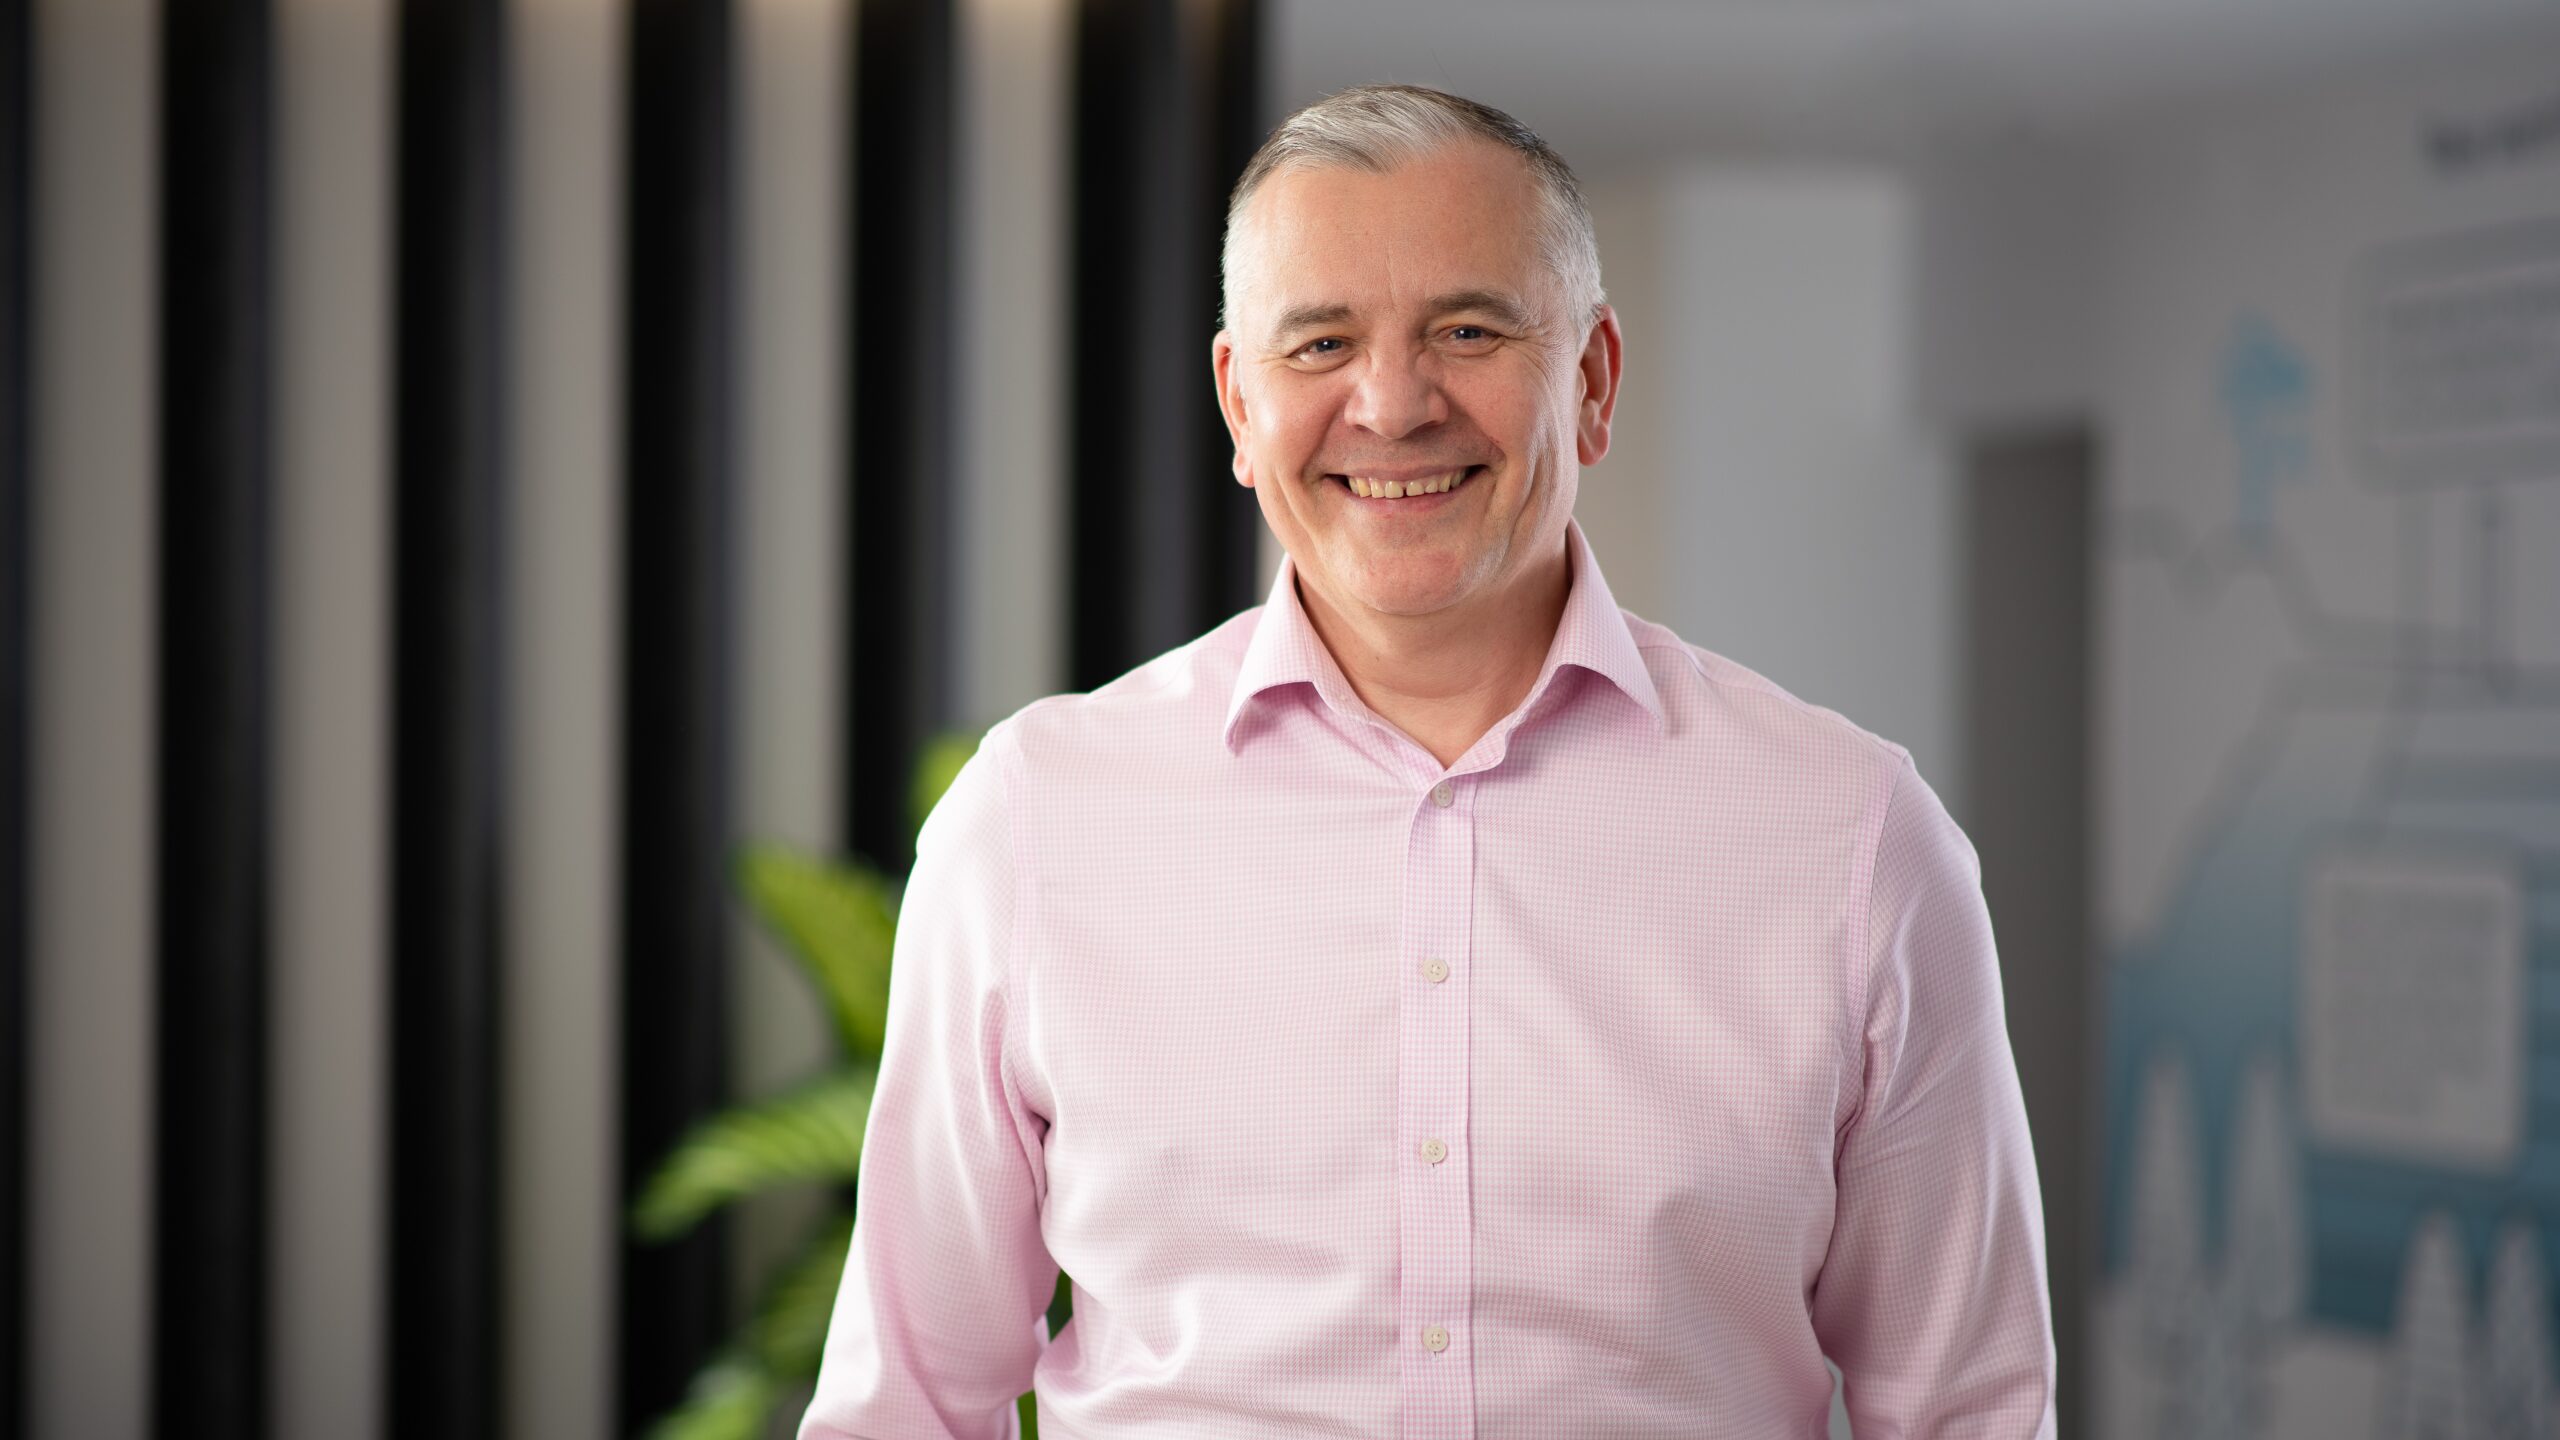 Steve Handscomb announced as Managing Director for Construction Business, effective 1st July 2023.